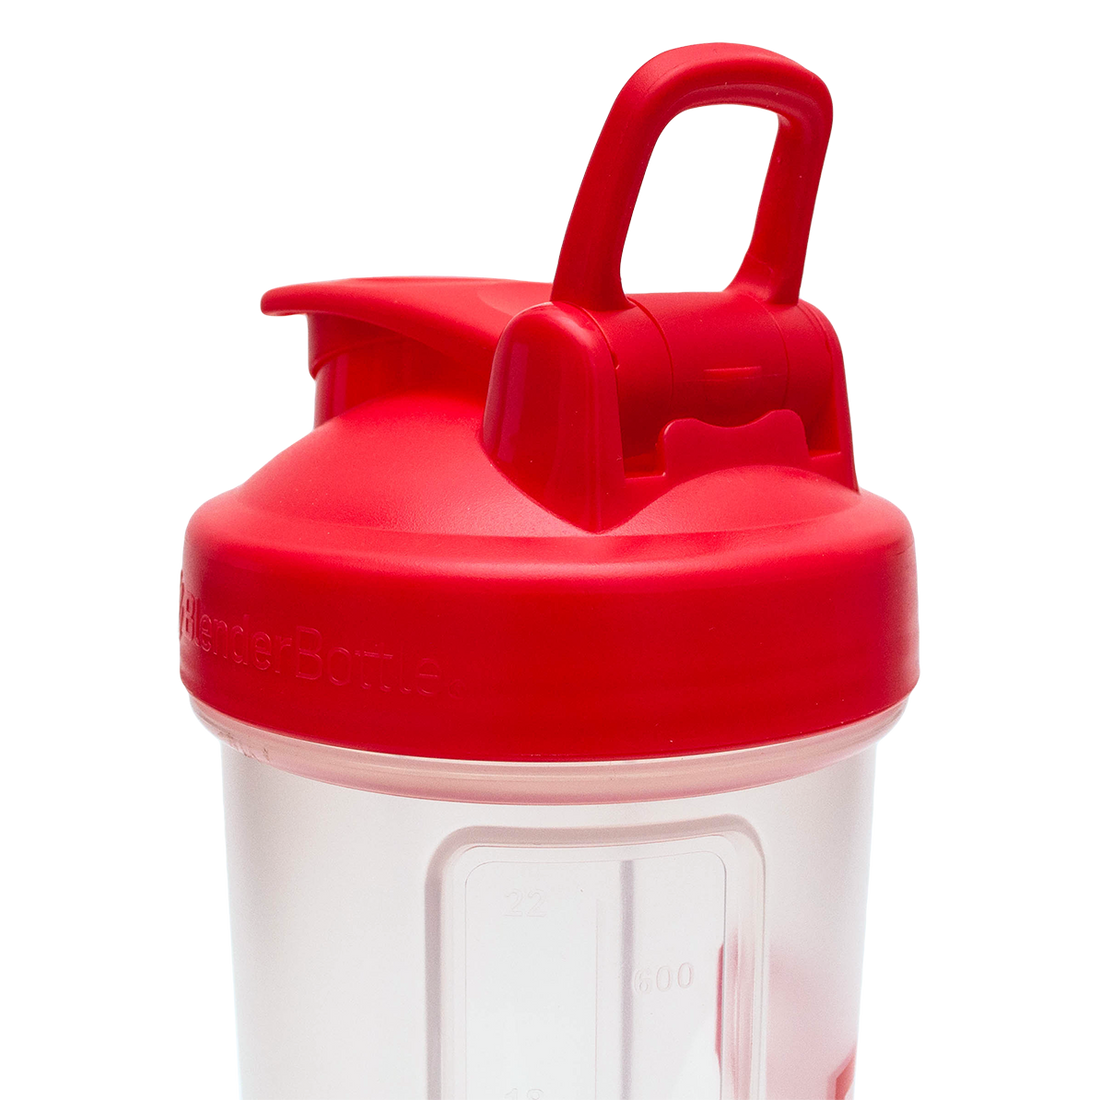 BioSteel Shaker Cup with Wire Whisk Blender Ball, Leak-Proof